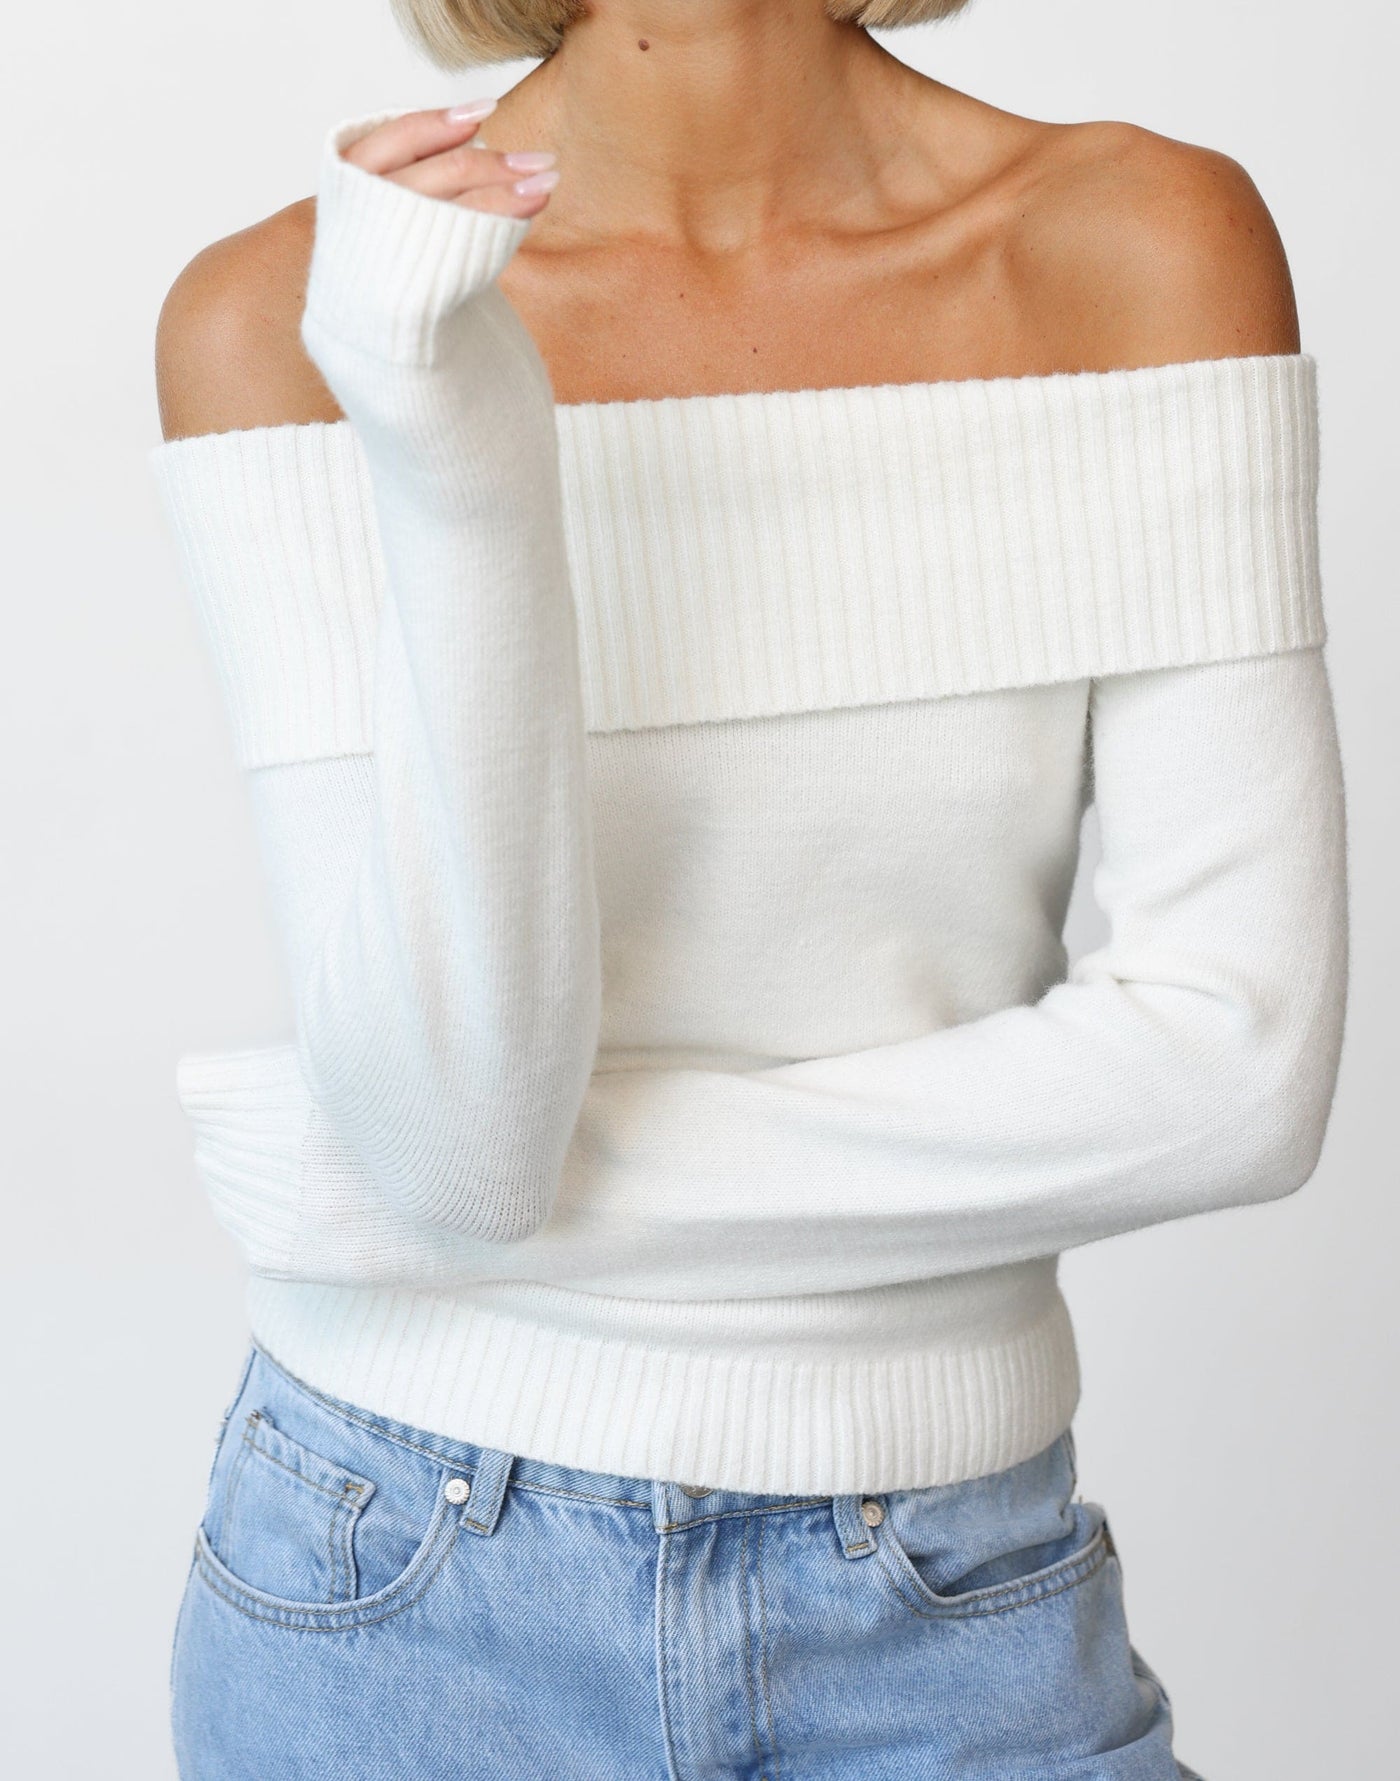 Hillary Jumper (White) - Off Shoulder Ribbed Detail Jumper - Women's Top - Charcoal Clothing